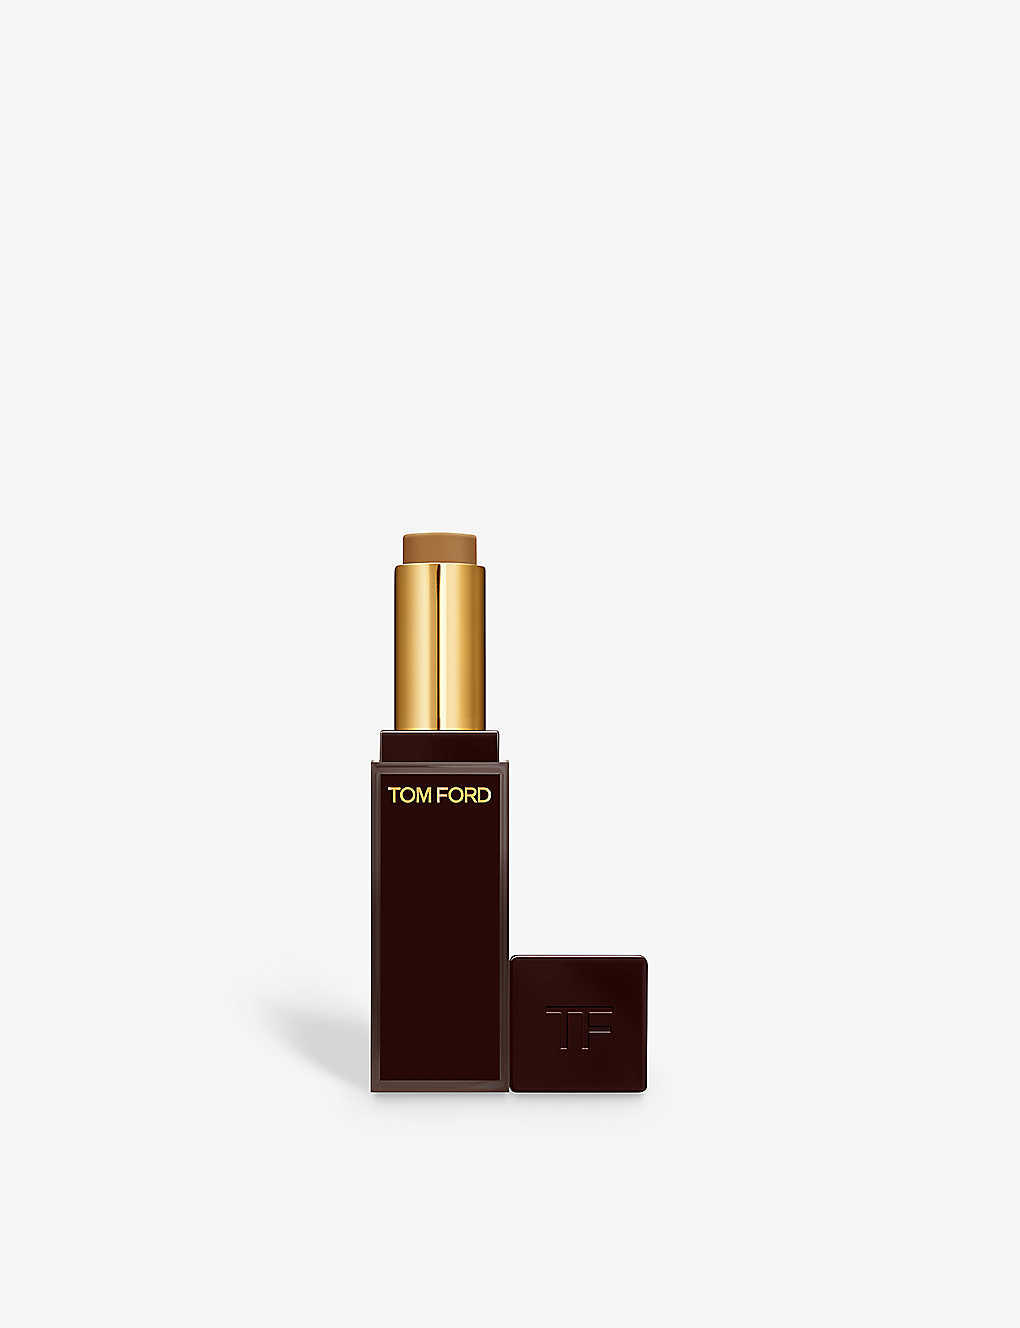 Tom Ford 7w0 Cocoa Traceless Soft Matte Concealer 4g